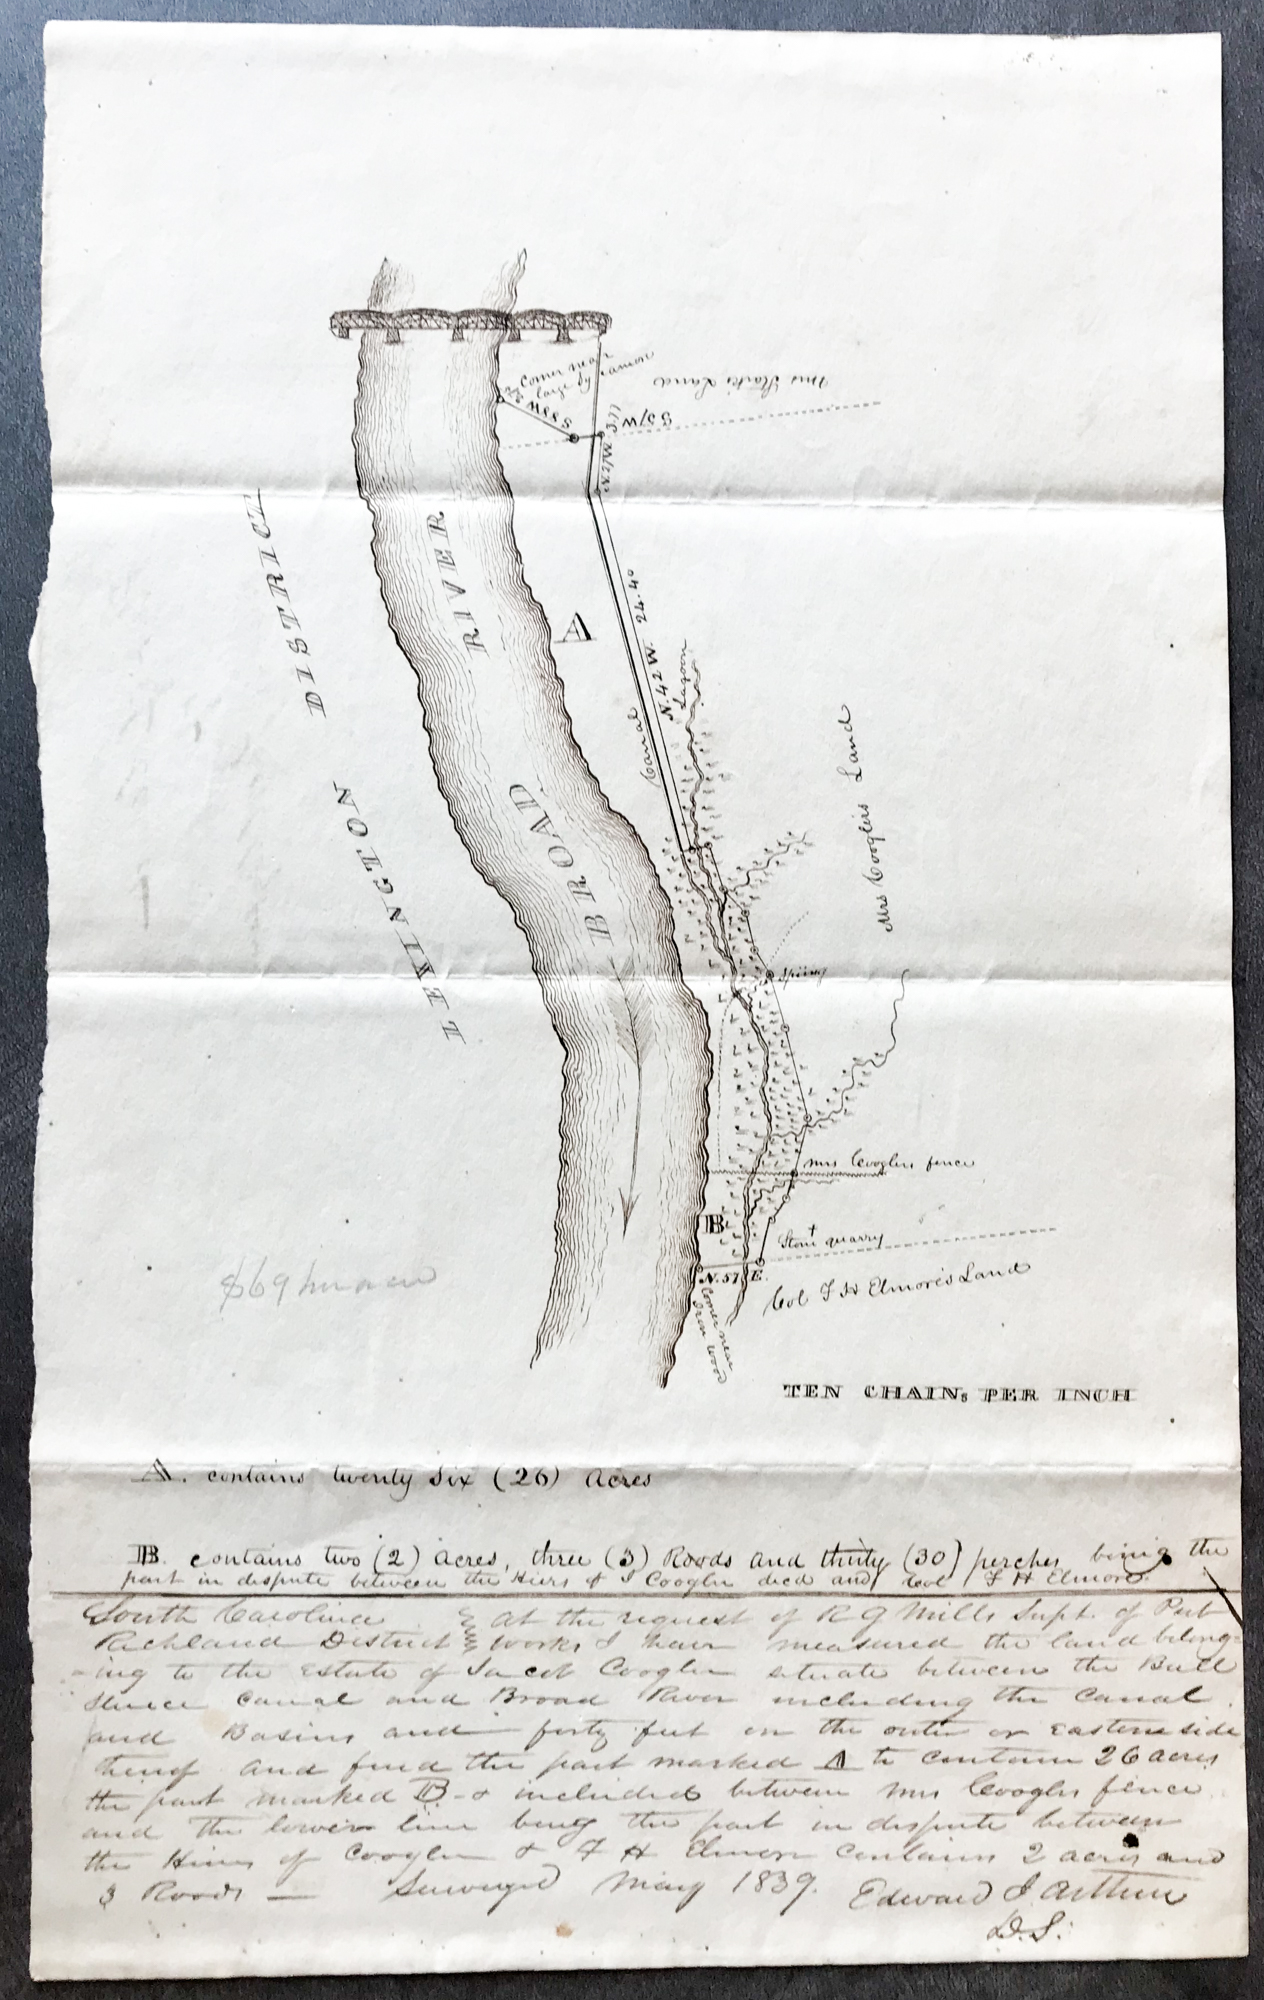 1839 SURVEY OF THE COLUMBIA CANAL - SCDAH 